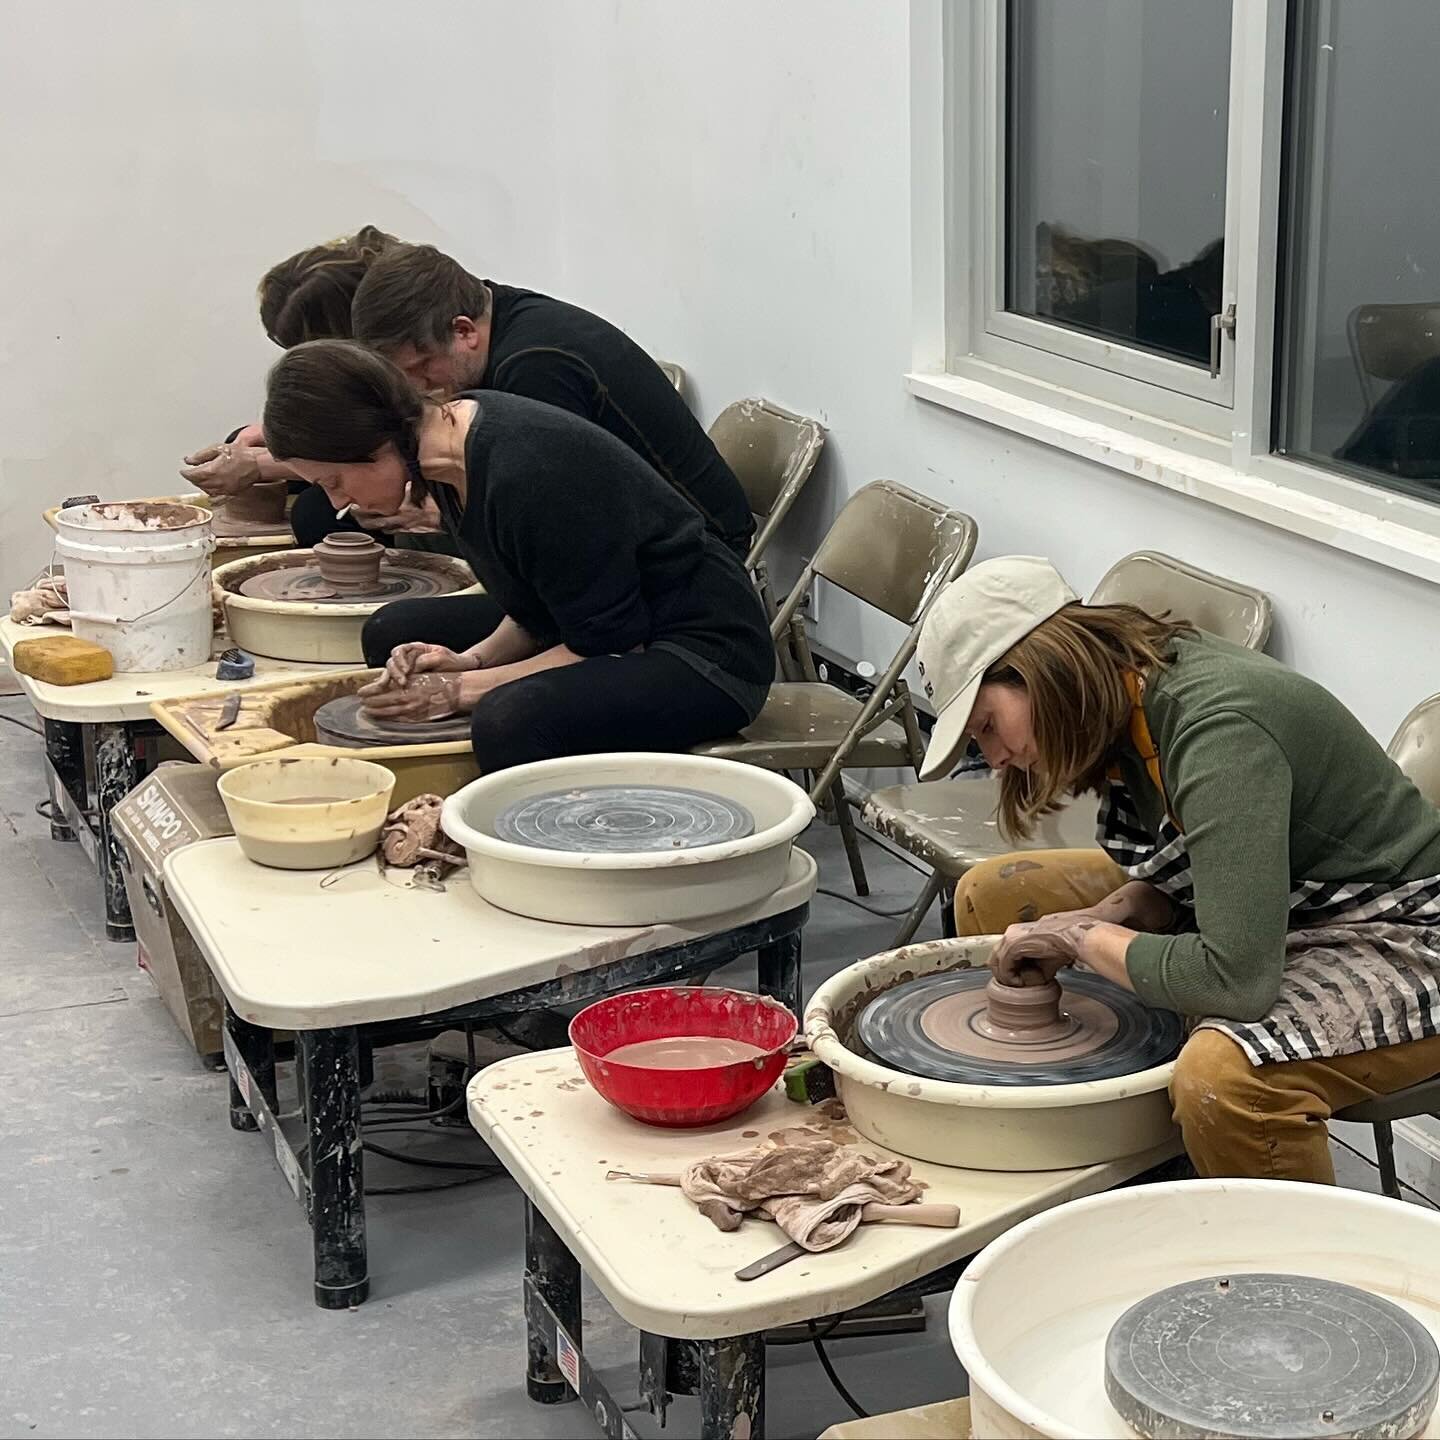 Wednesday night pottery class at @catskillartspace is in full swing and we&rsquo;re having so much fun. Such a great group including returning students, beginners, couples and coworkers and the nicest father-daughter duo making awesome collaborations